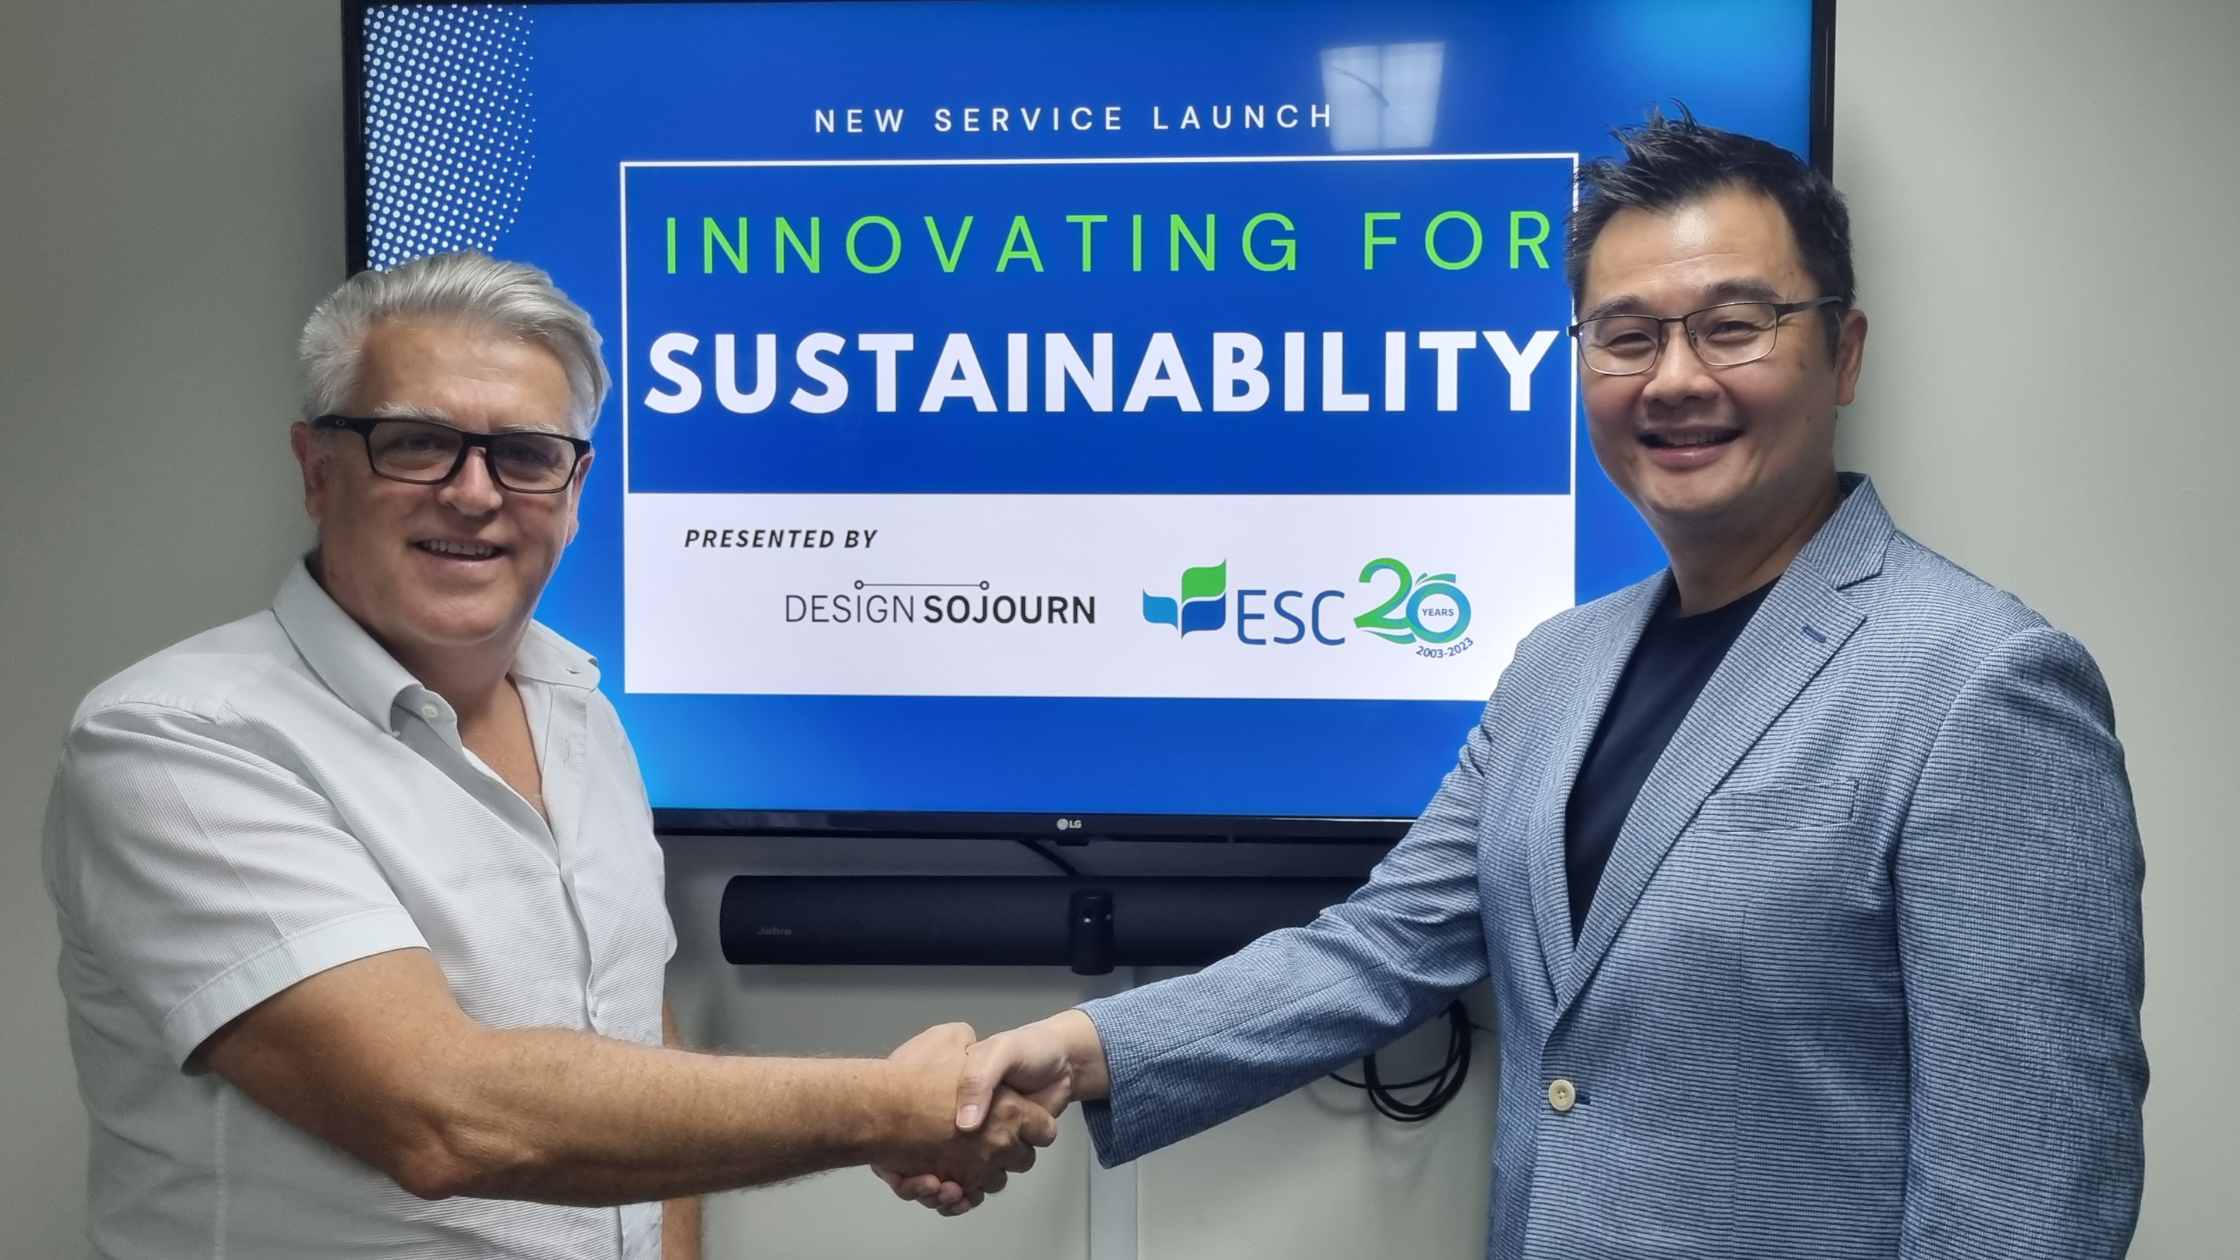 ESC and Design Sojourn partnered to launch the Innovating for Sustainability (ISP) Programme which aims to help SMEs in Singapore build their sustainability capabilities. SMEs can access grants of up to 70%, while non-SMEs can receive up to 50%.